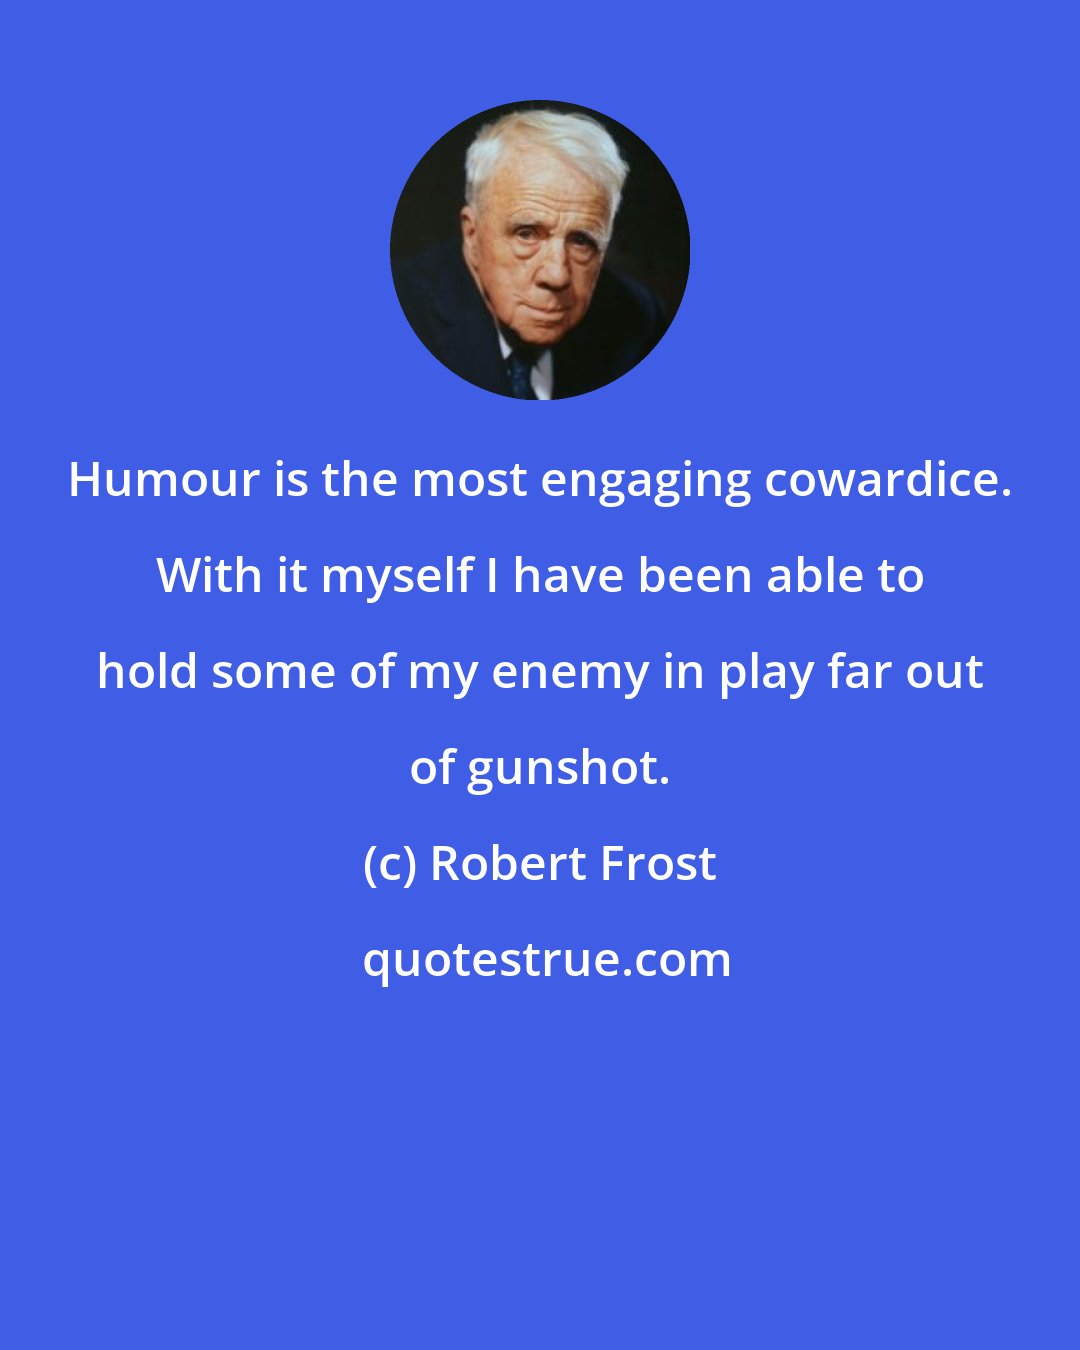 Robert Frost: Humour is the most engaging cowardice. With it myself I have been able to hold some of my enemy in play far out of gunshot.